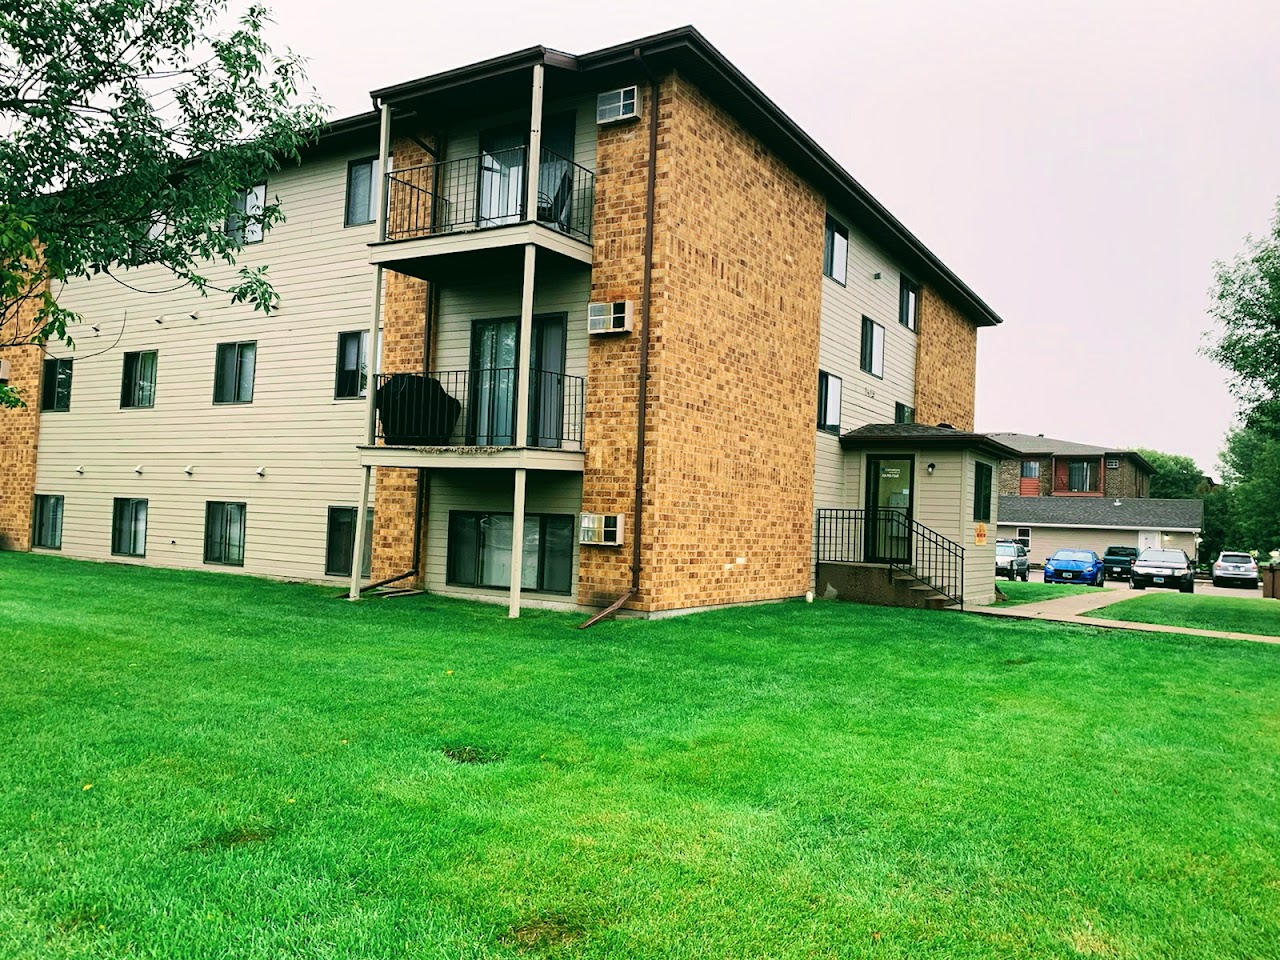 Photo of PRAIRIE WEST APTS VI. Affordable housing located at 1121 14TH AVE E WEST FARGO, ND 58078